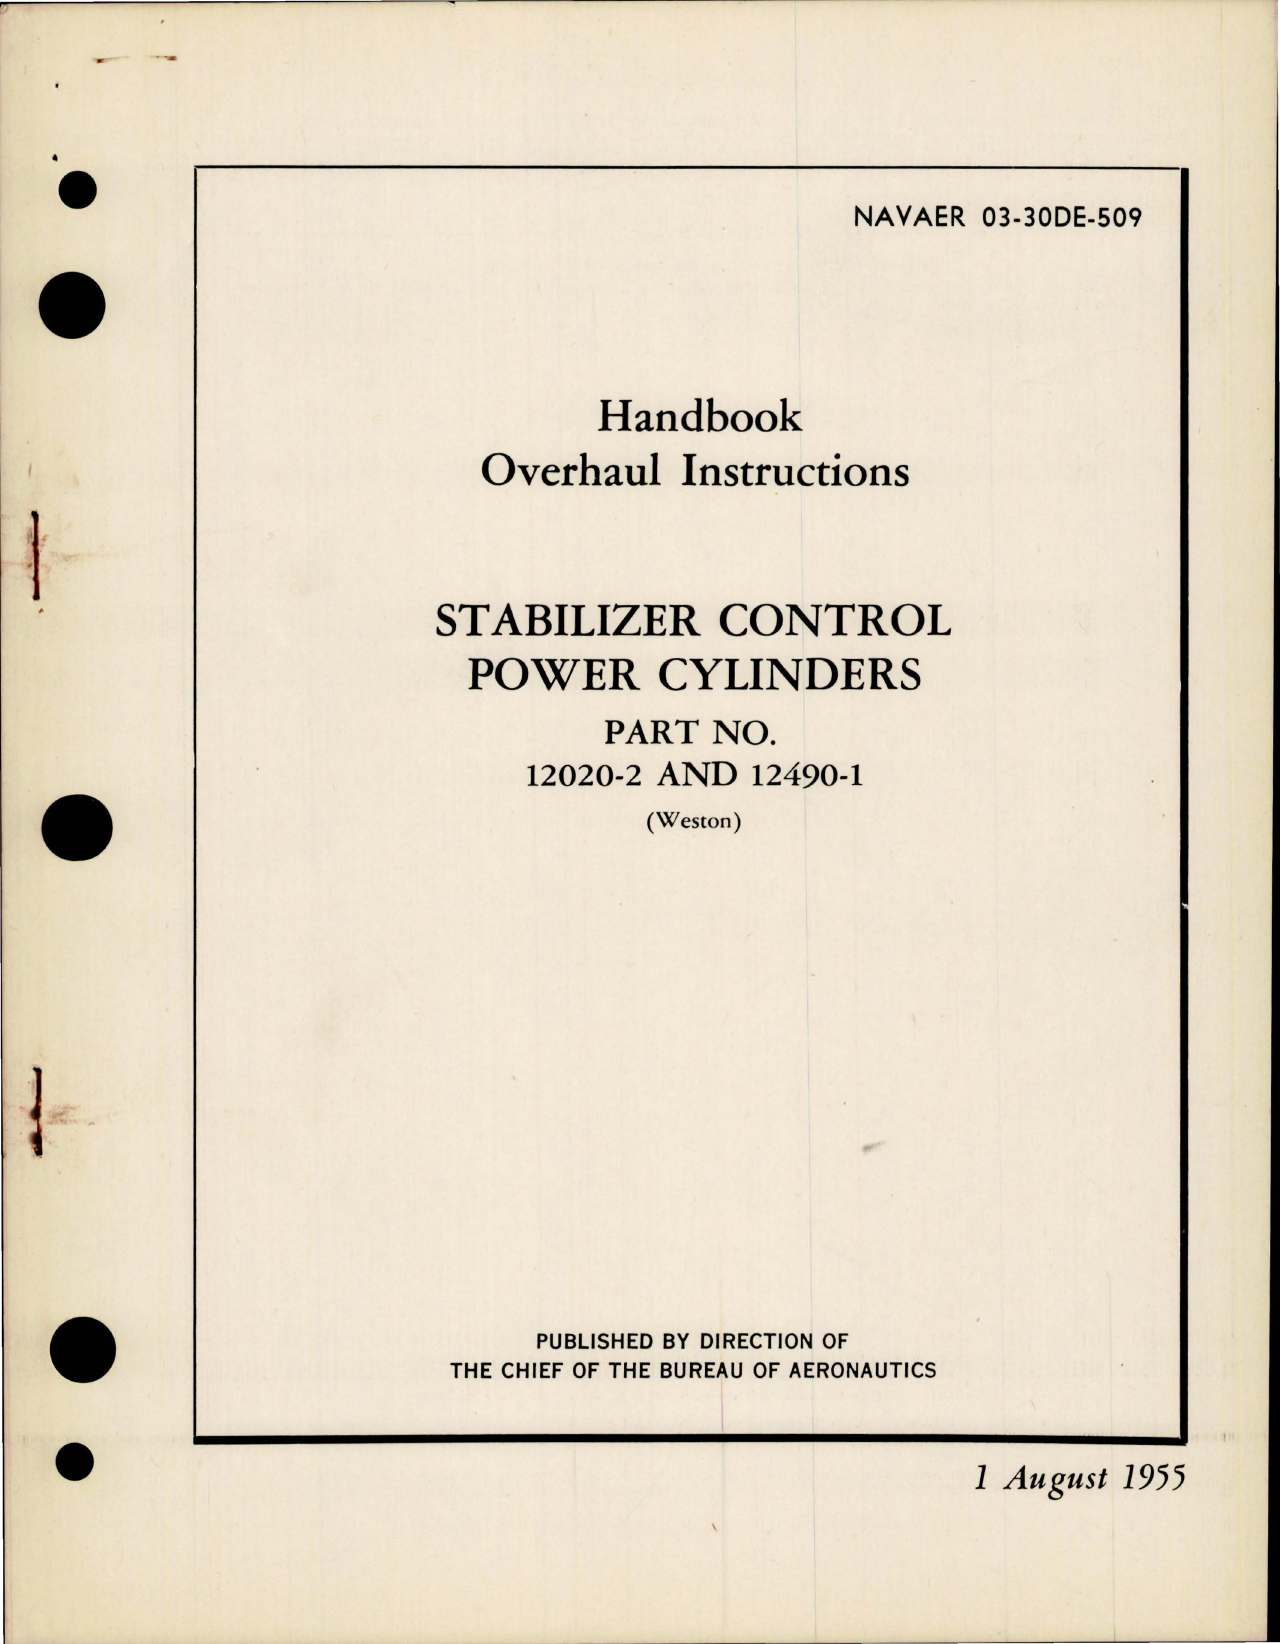 Sample page 1 from AirCorps Library document: Overhaul Instructions for Stabilizer Control Power Cylinders - Parts 12020-2 and 12490-1 